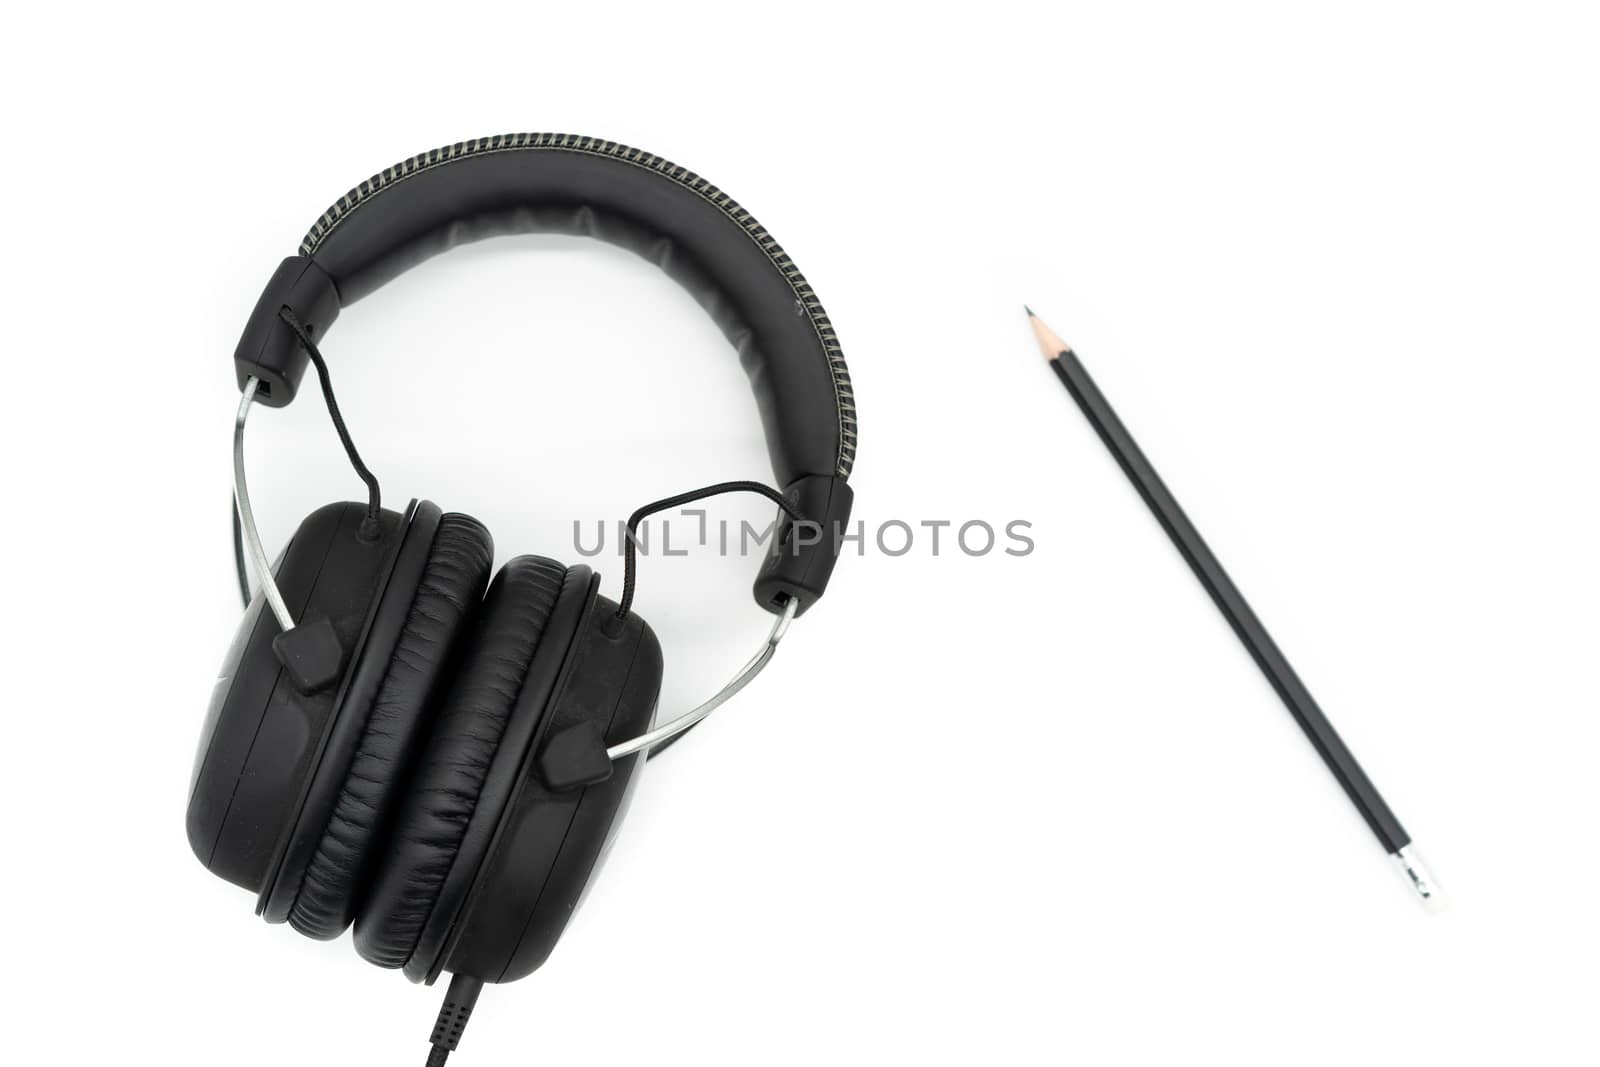 The black pencil is on the right side of the picture, the headphones are on the left side of the picture, all on a white background.